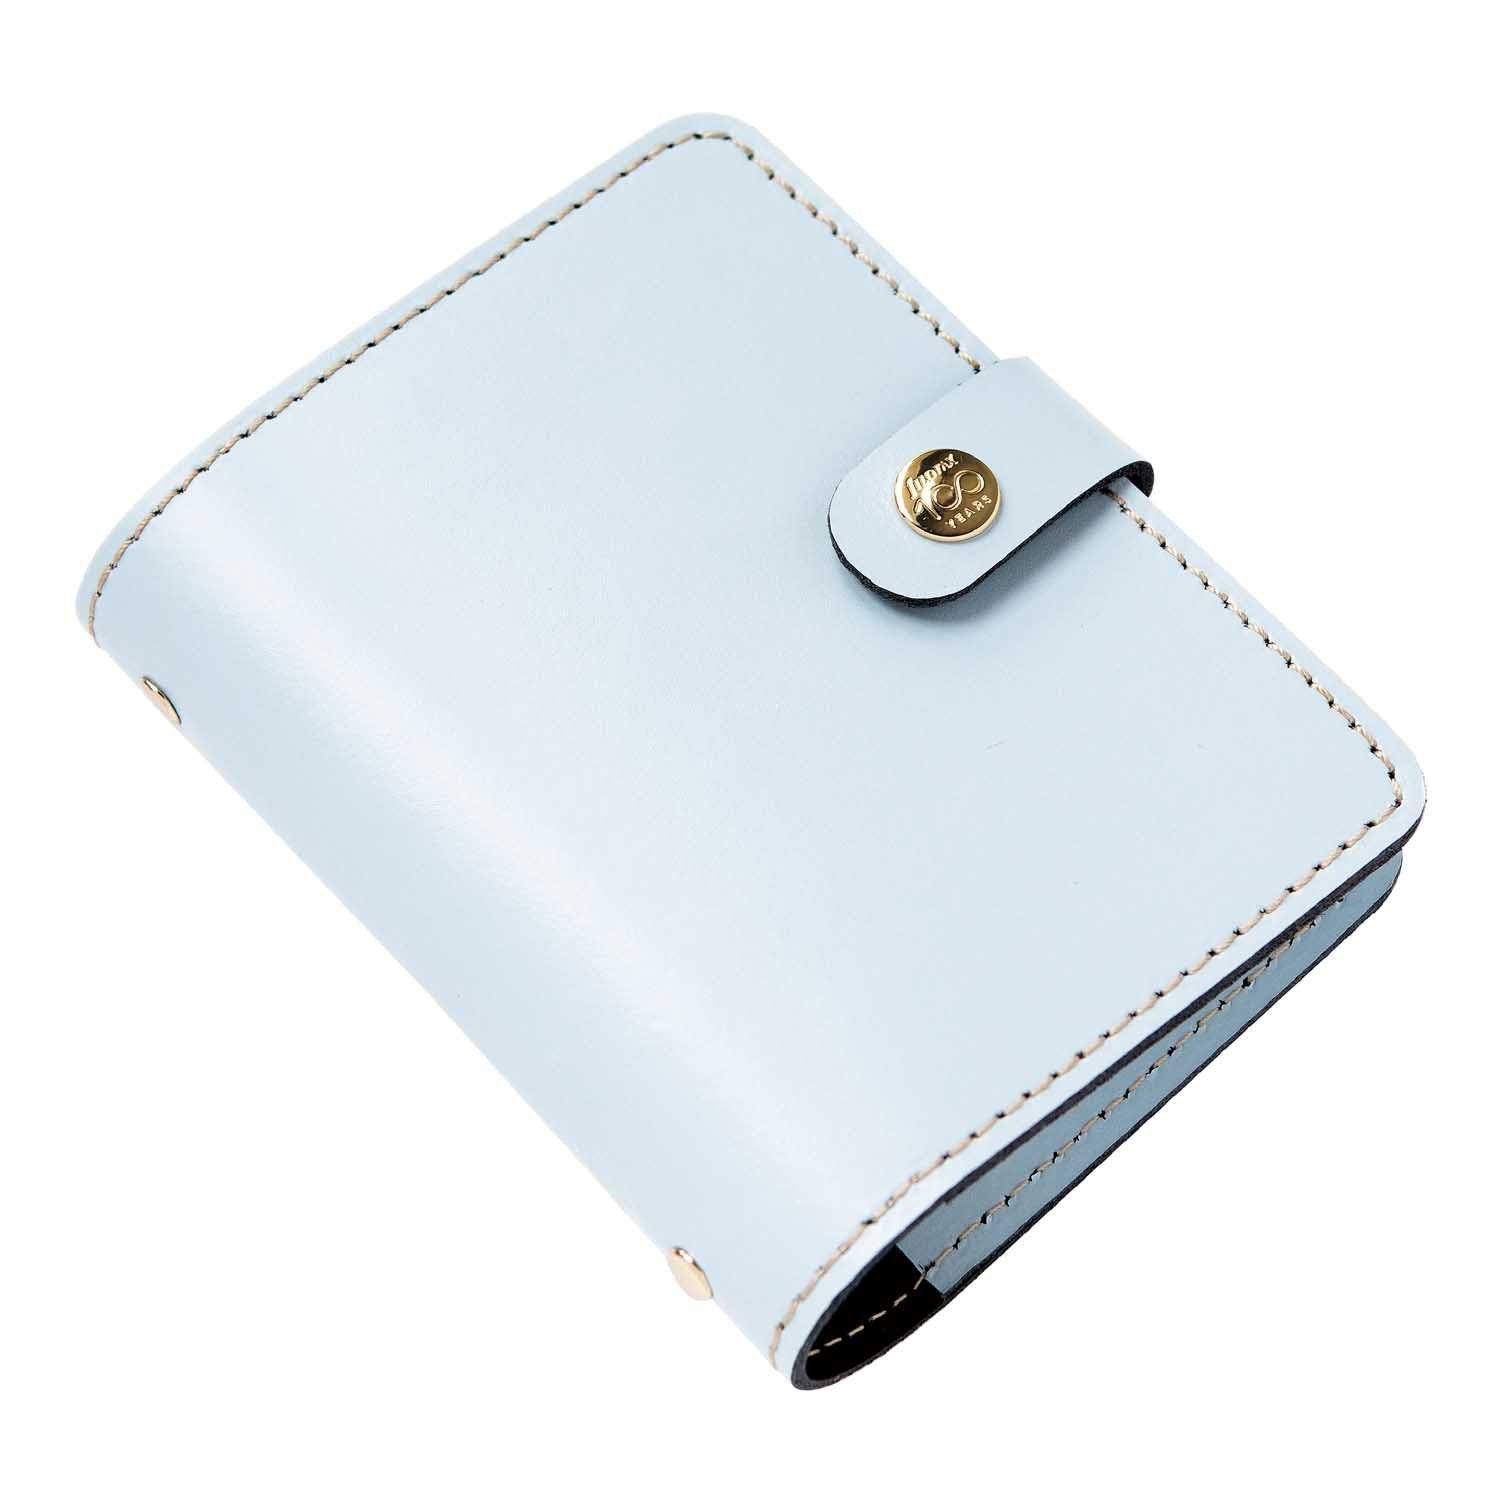 Filofax Centennial Limited Edition The Original Pocket Leather Organizer Sky Blue Front Side